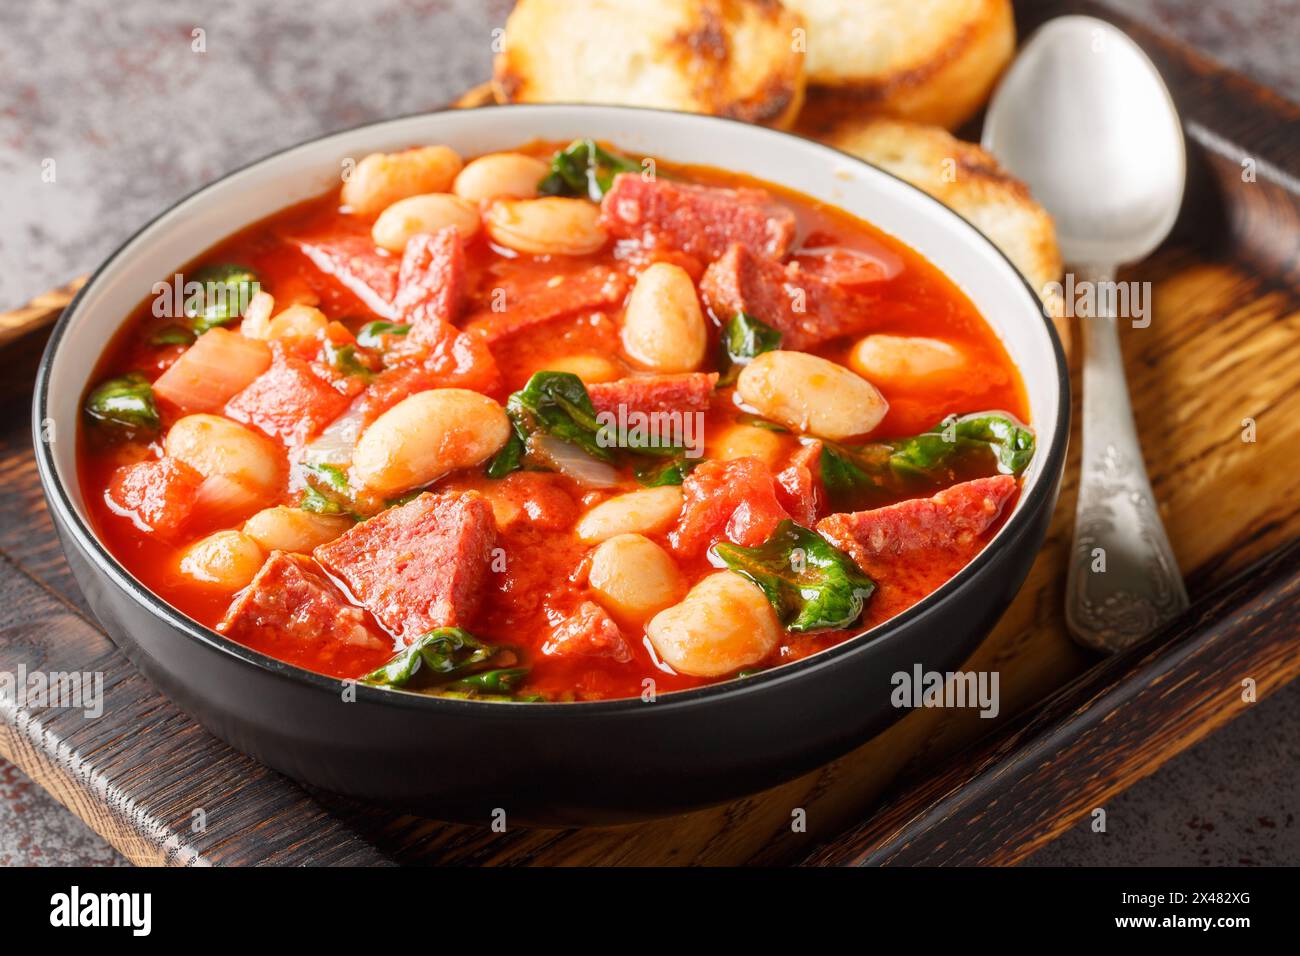 Spanish stew of butter beans, chorizo and spinach in tomato sauce close-up in a bowl on the table. Horizontal Stock Photo